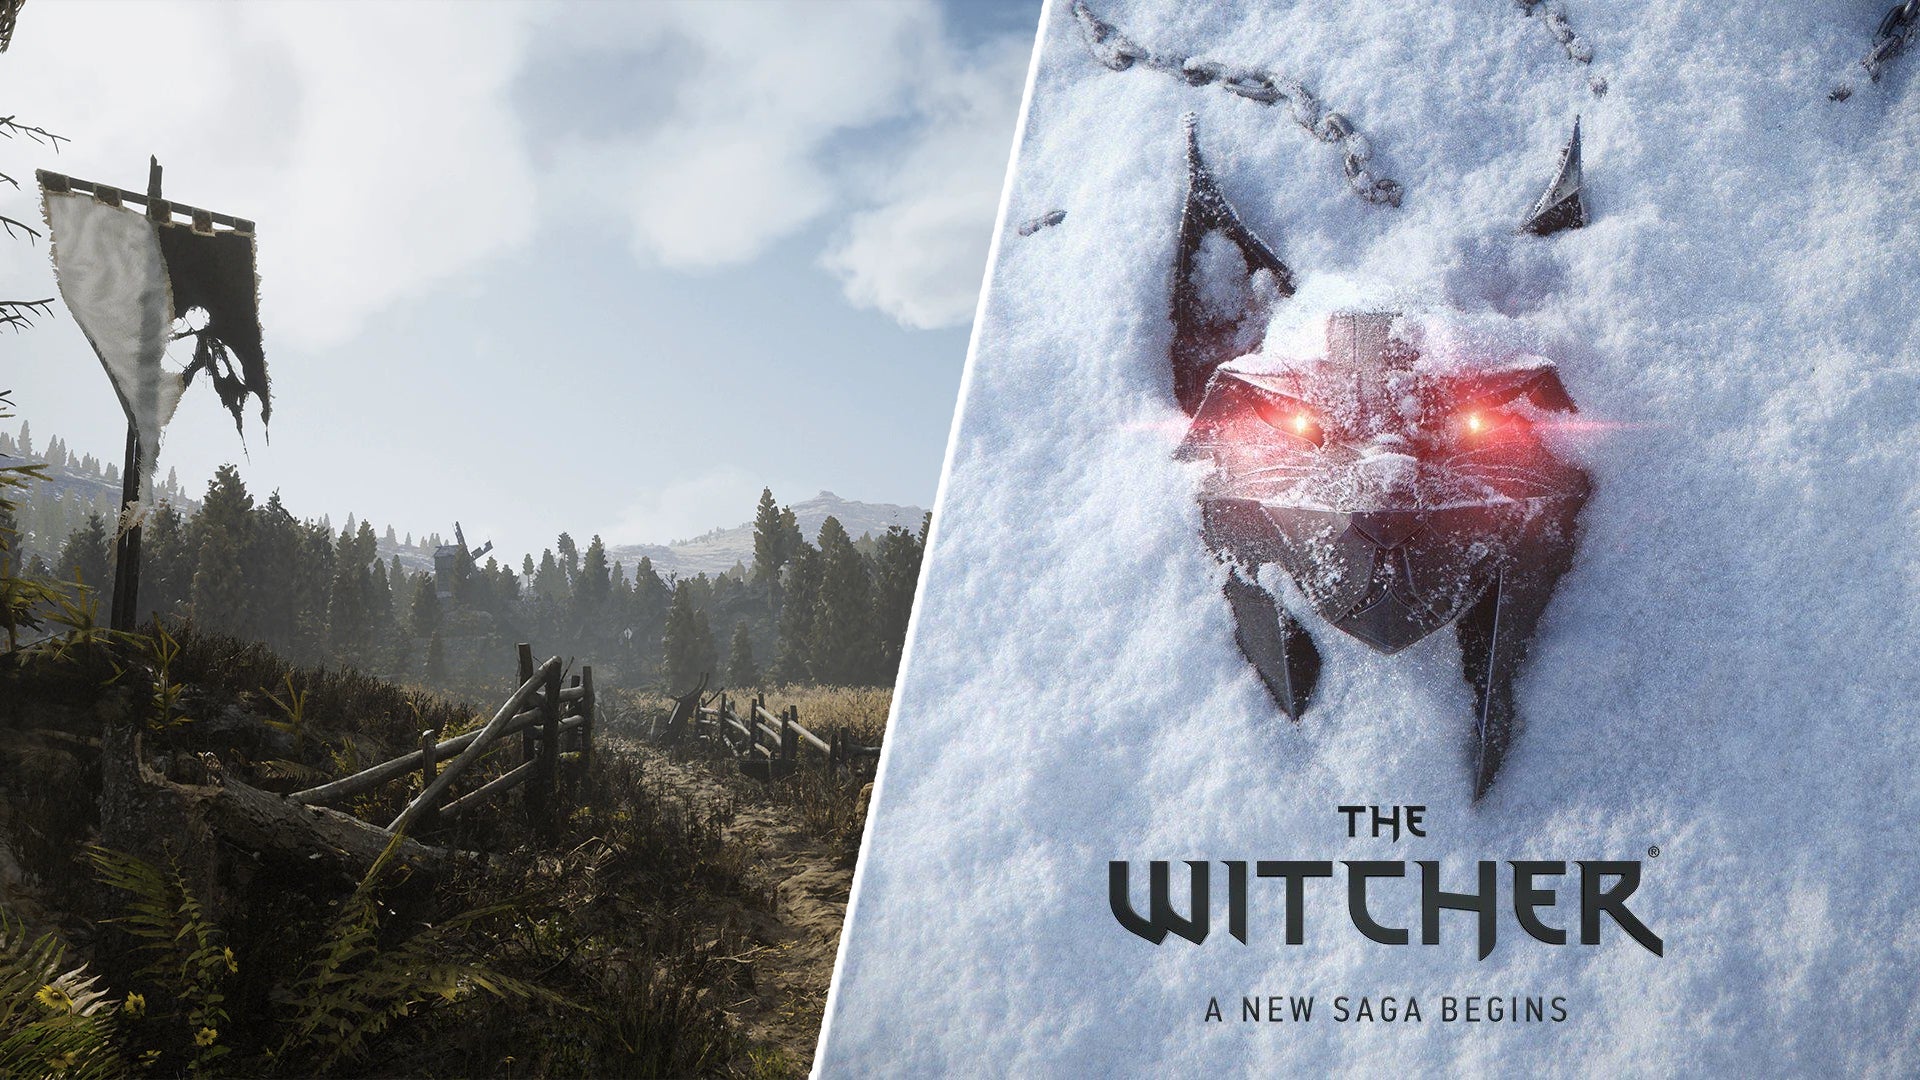 Image for Did Epic tempt CD Projekt Red over to Unreal Engine 5 with a "fake" Witcher demo?